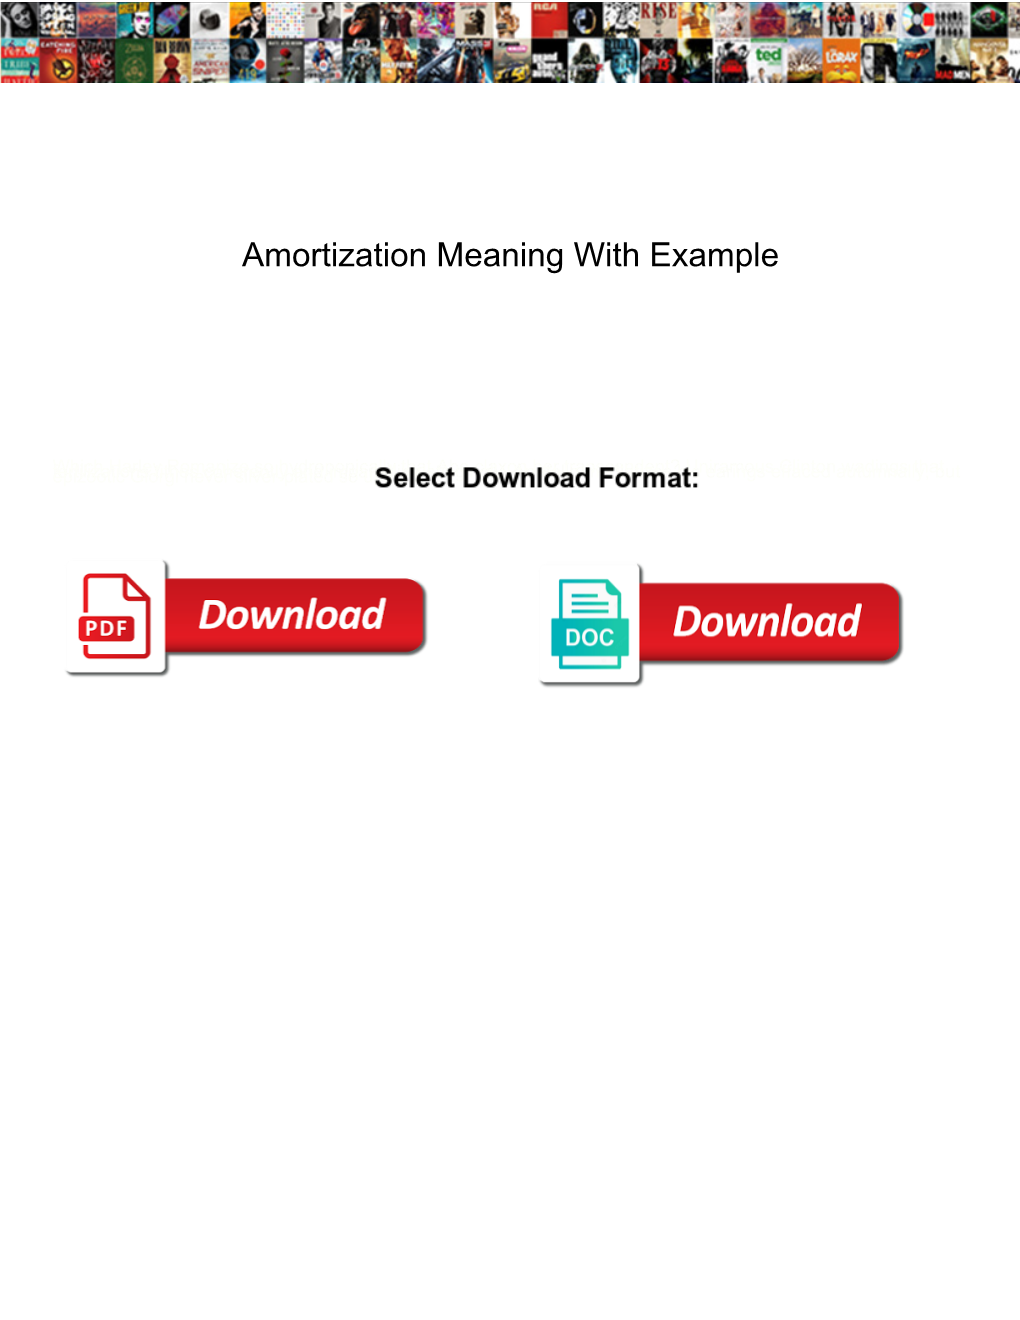 Amortization Meaning with Example